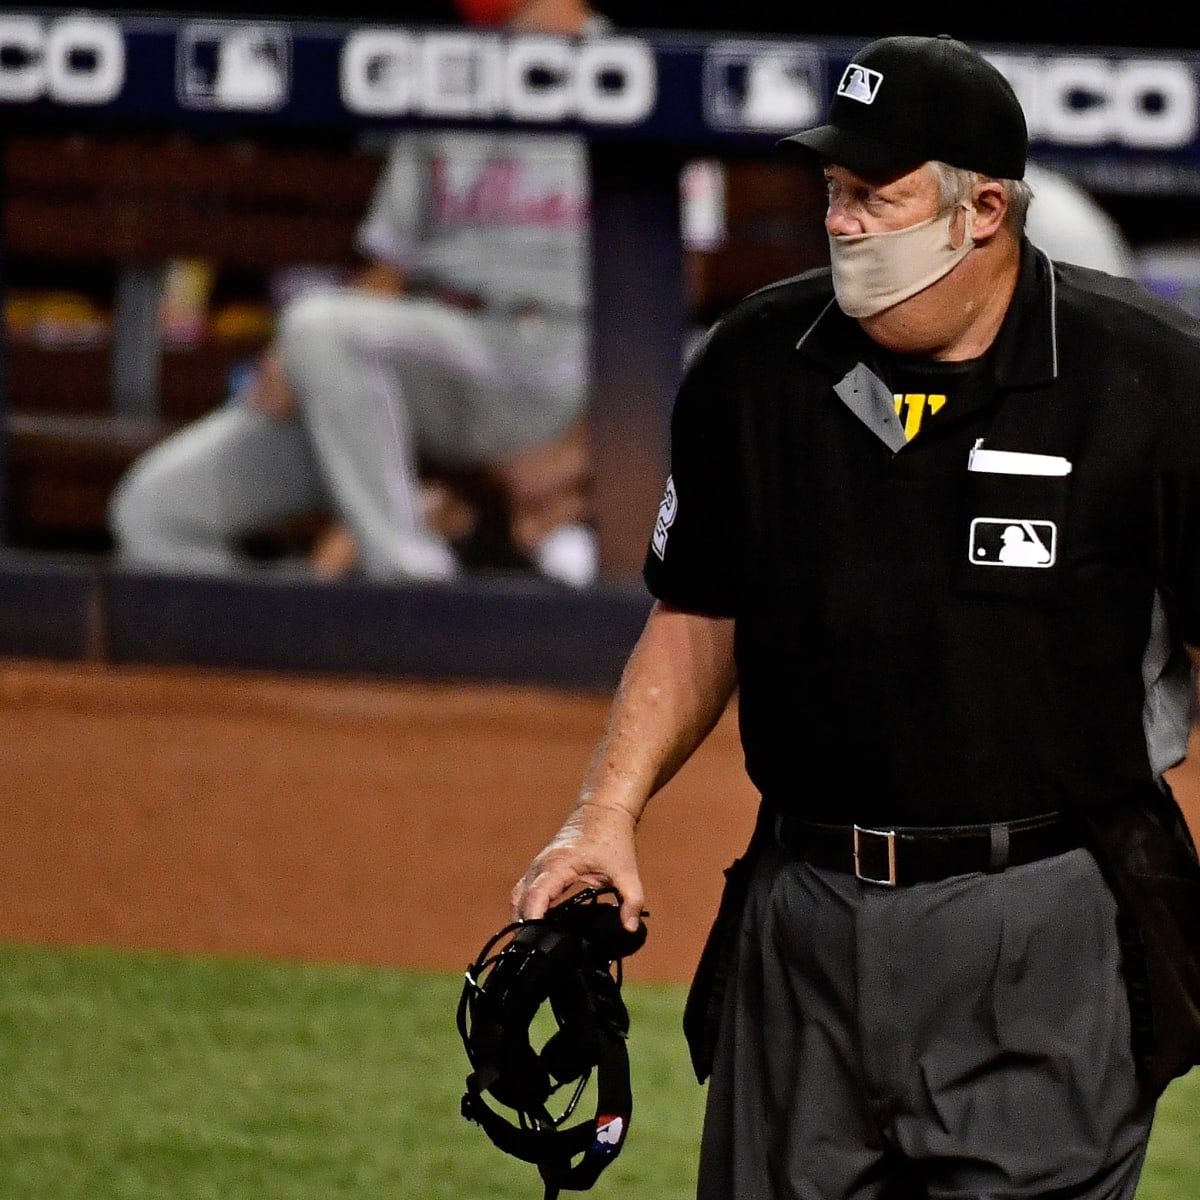 Joe West to break MLB umpiring record with 5,376th game - Sports Illustrated